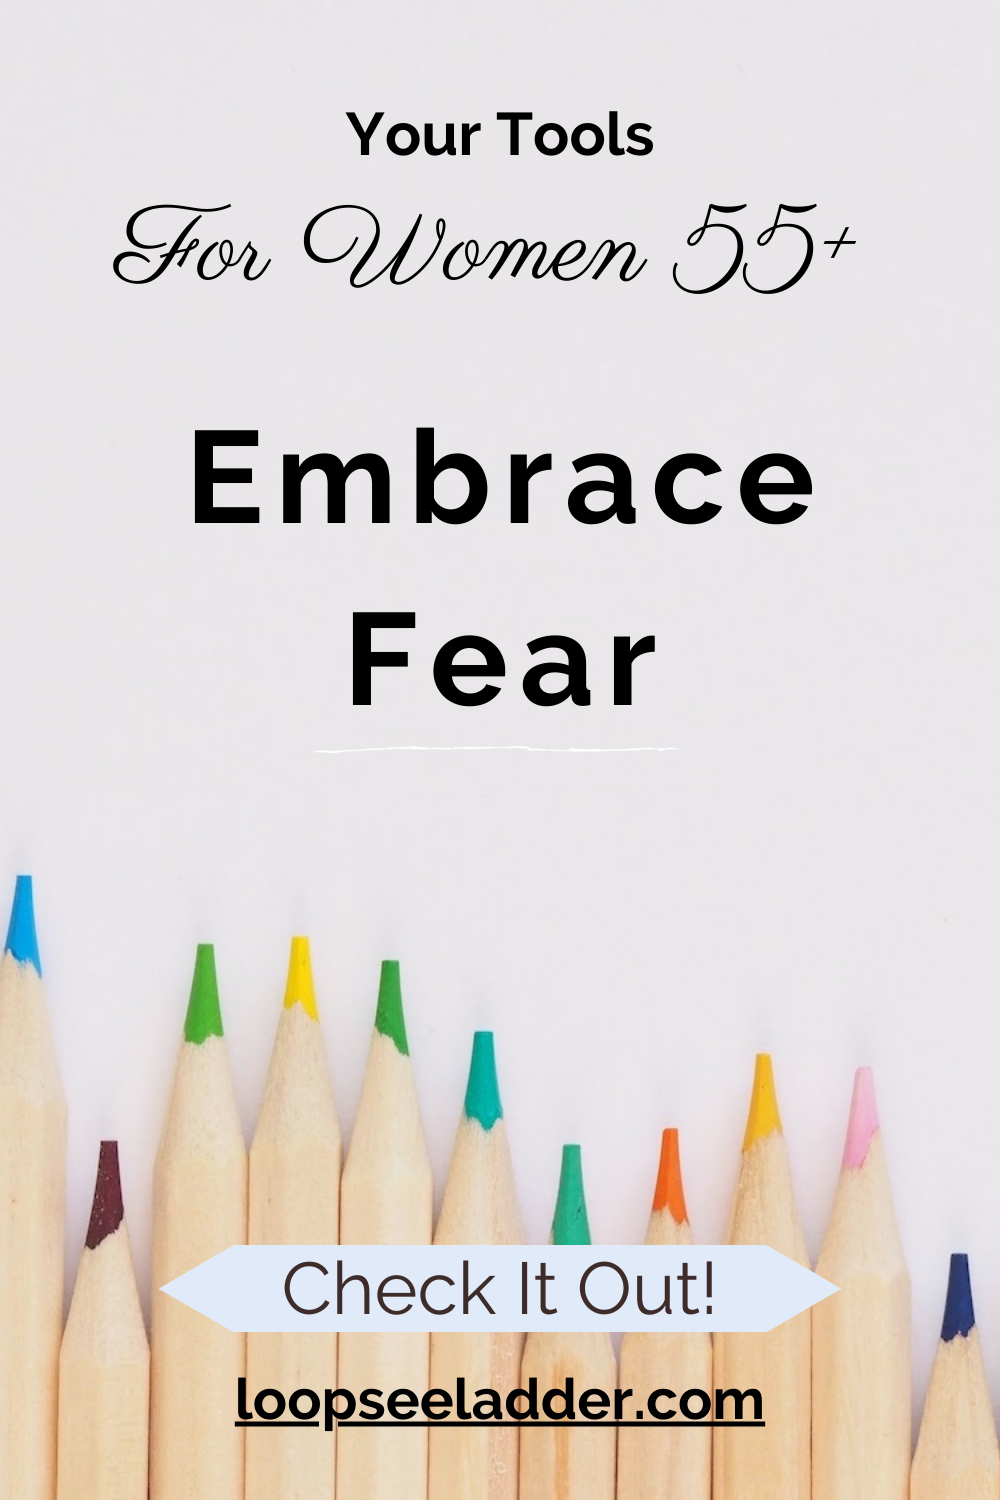 Why Women Over 55 Should Embrace Fear Instead of Avoiding It